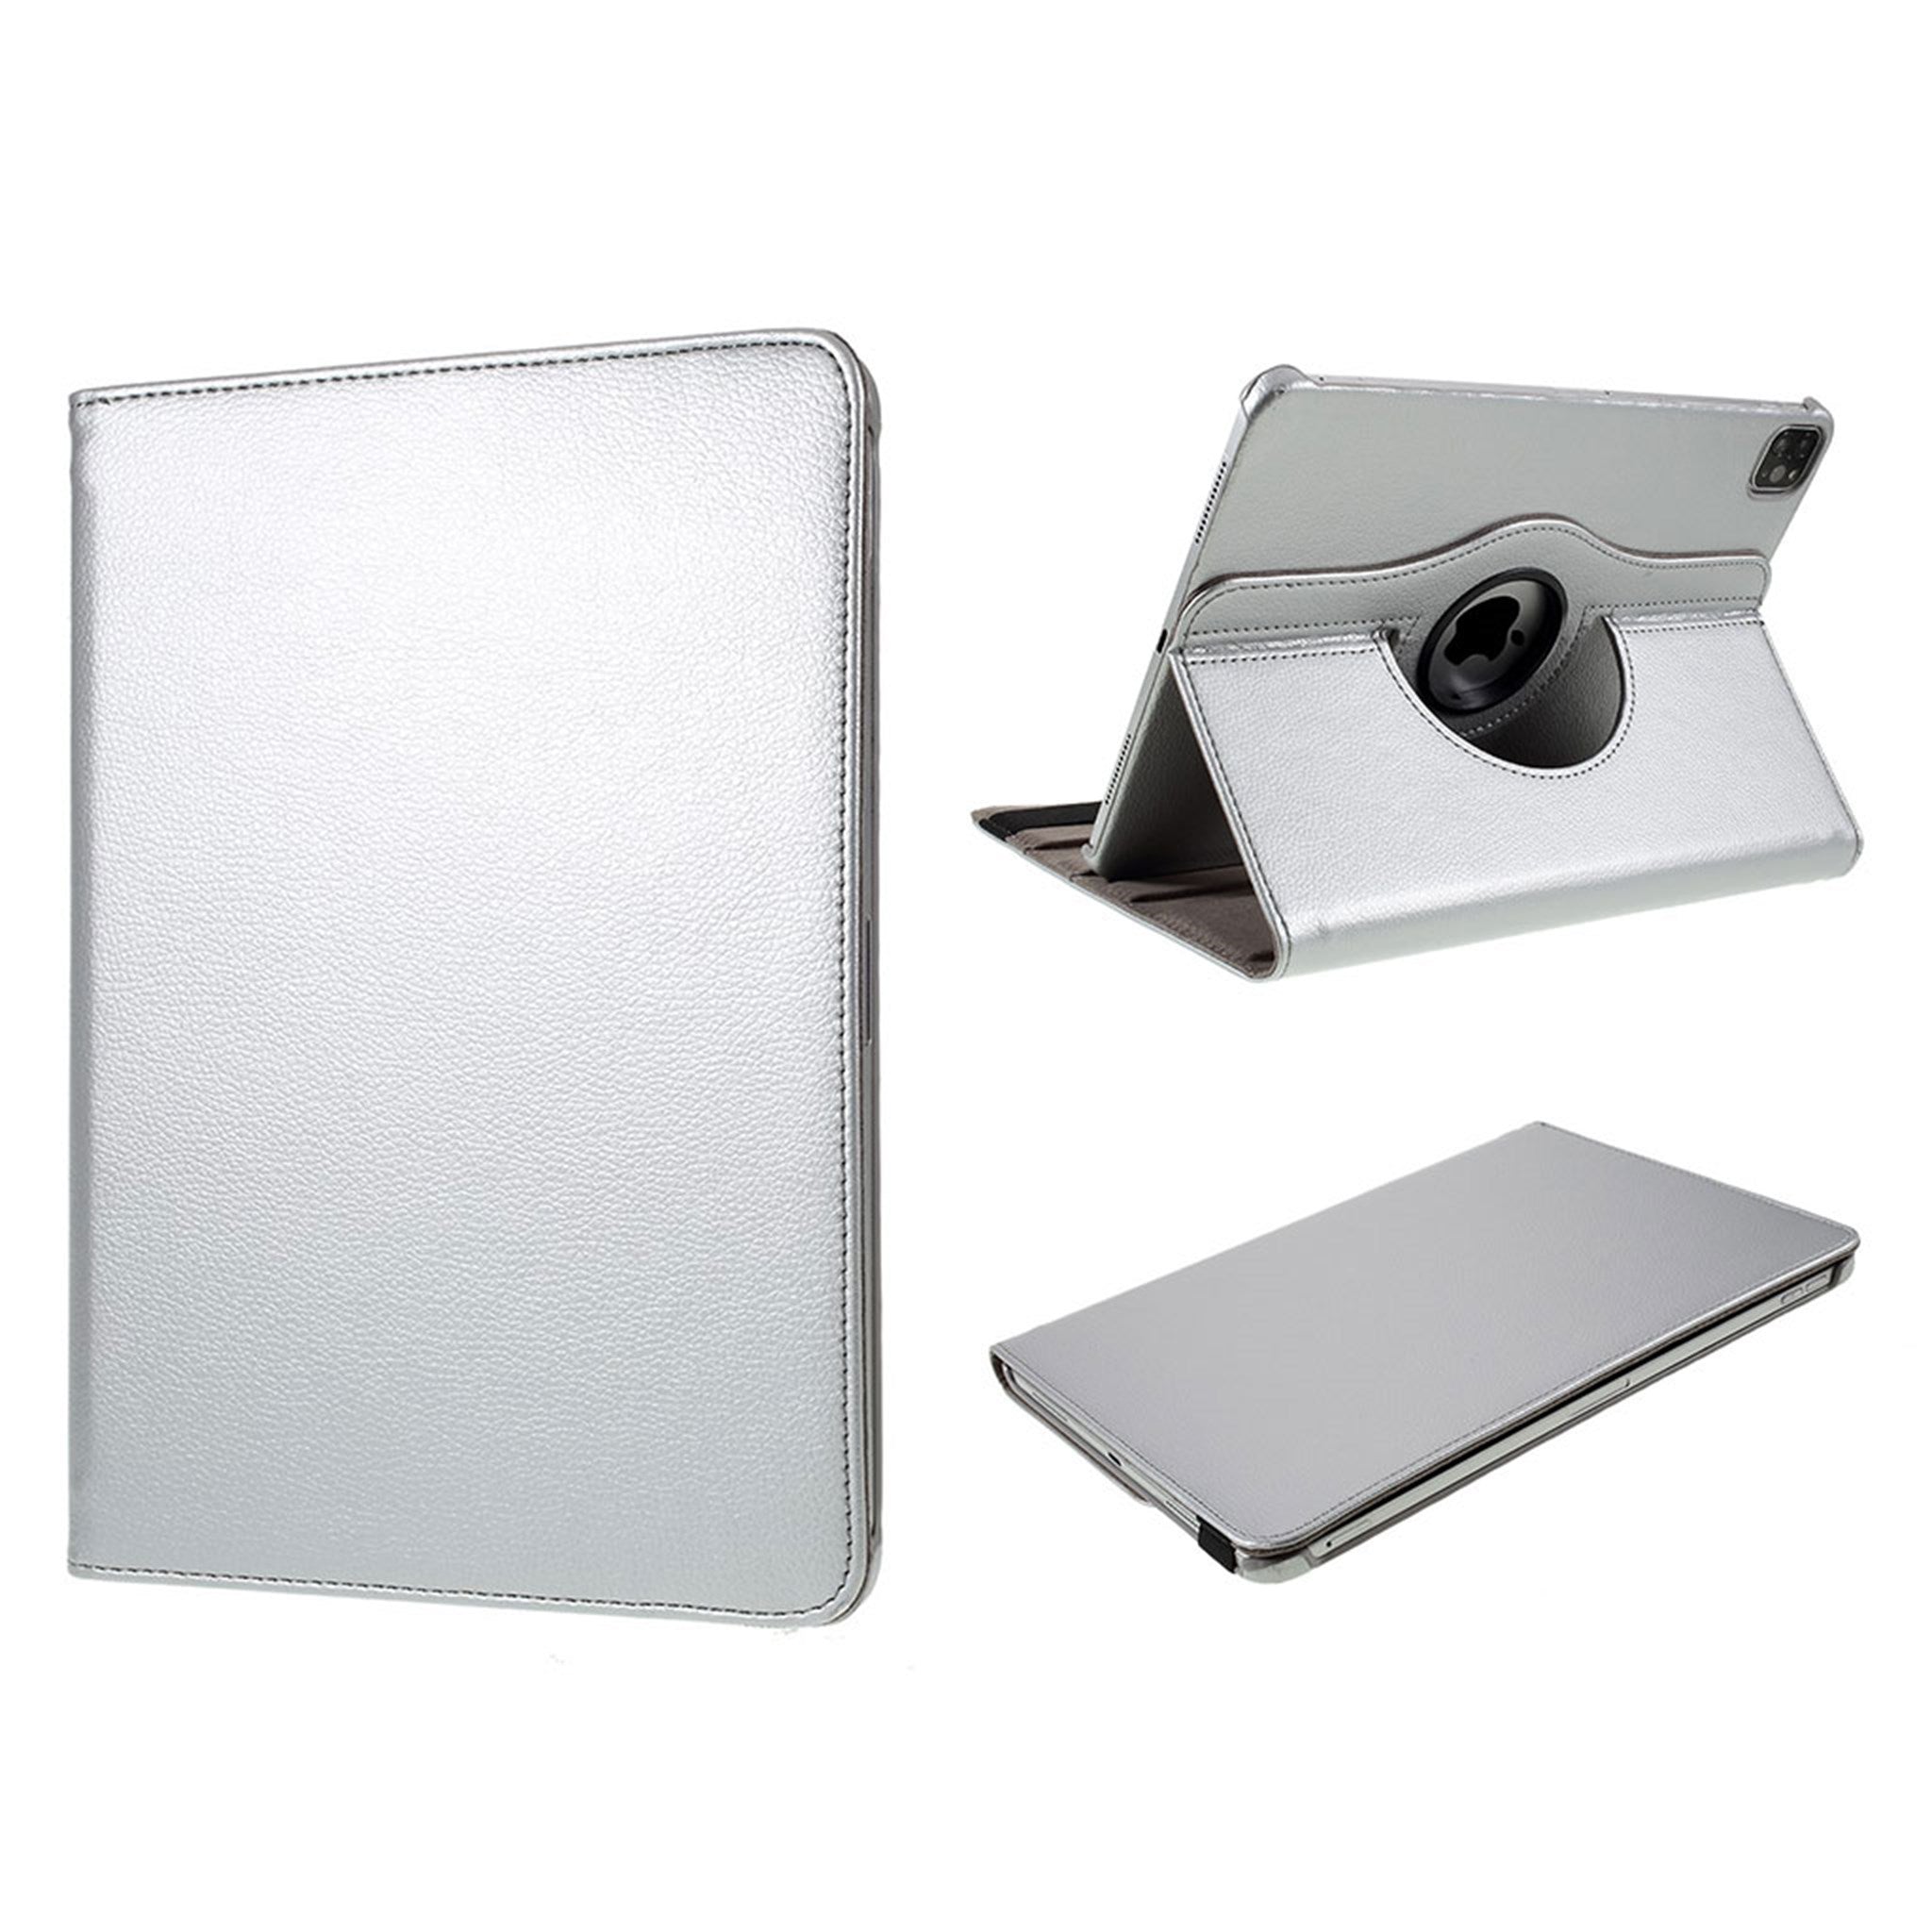 iPad Air (2020) 360 degree rotatable leather case - Silver